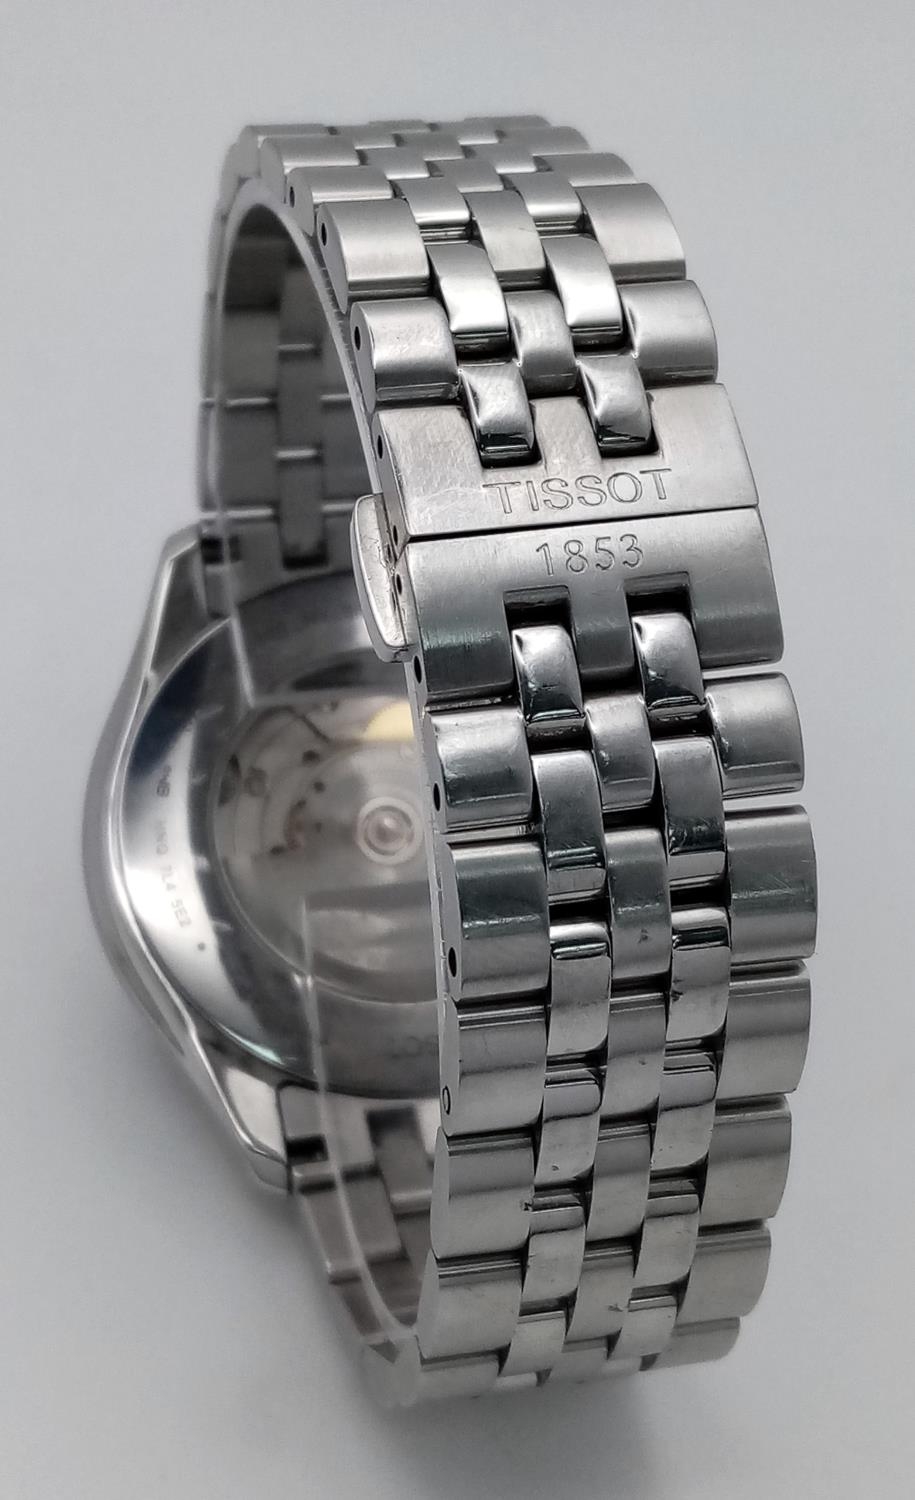 A Tissot Powermatic 80 Gents Watch. Stainless steel bracelet and case - 41mm. Black dial with date - Image 21 of 28